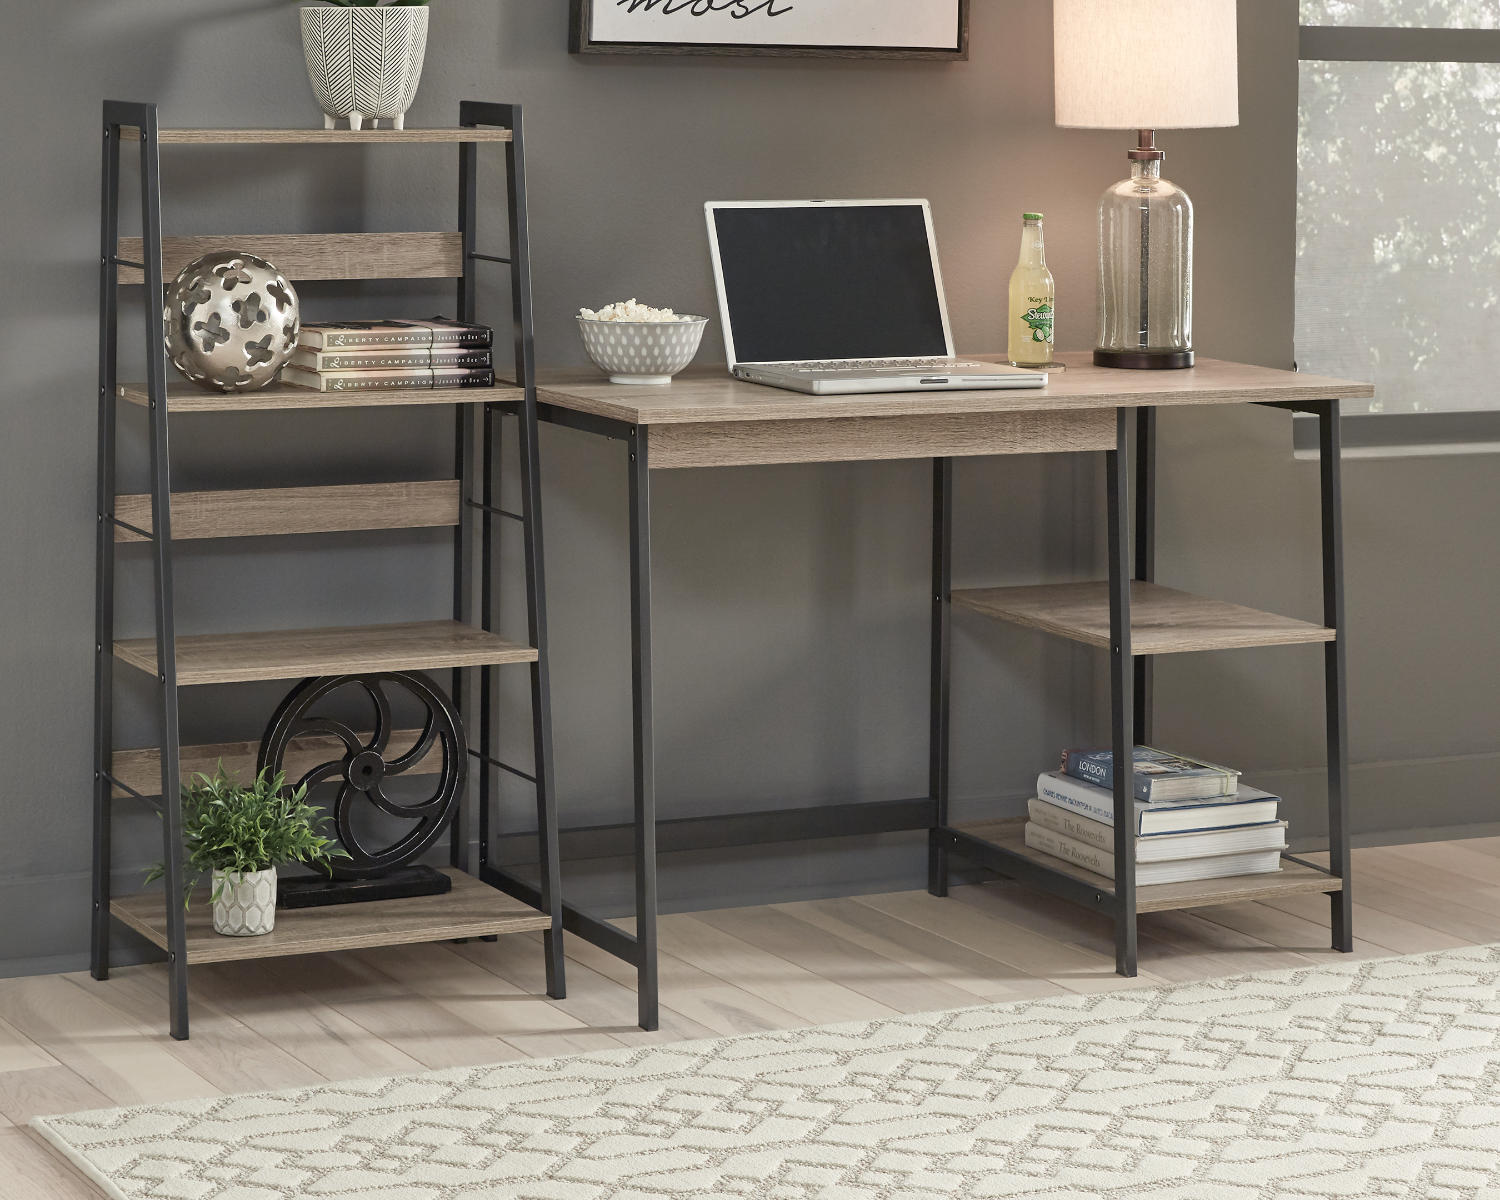 Signature Design by Ashley Casual Soho Home Office Desk and Shelf  Light Brown/Gunmetal - image 2 of 6